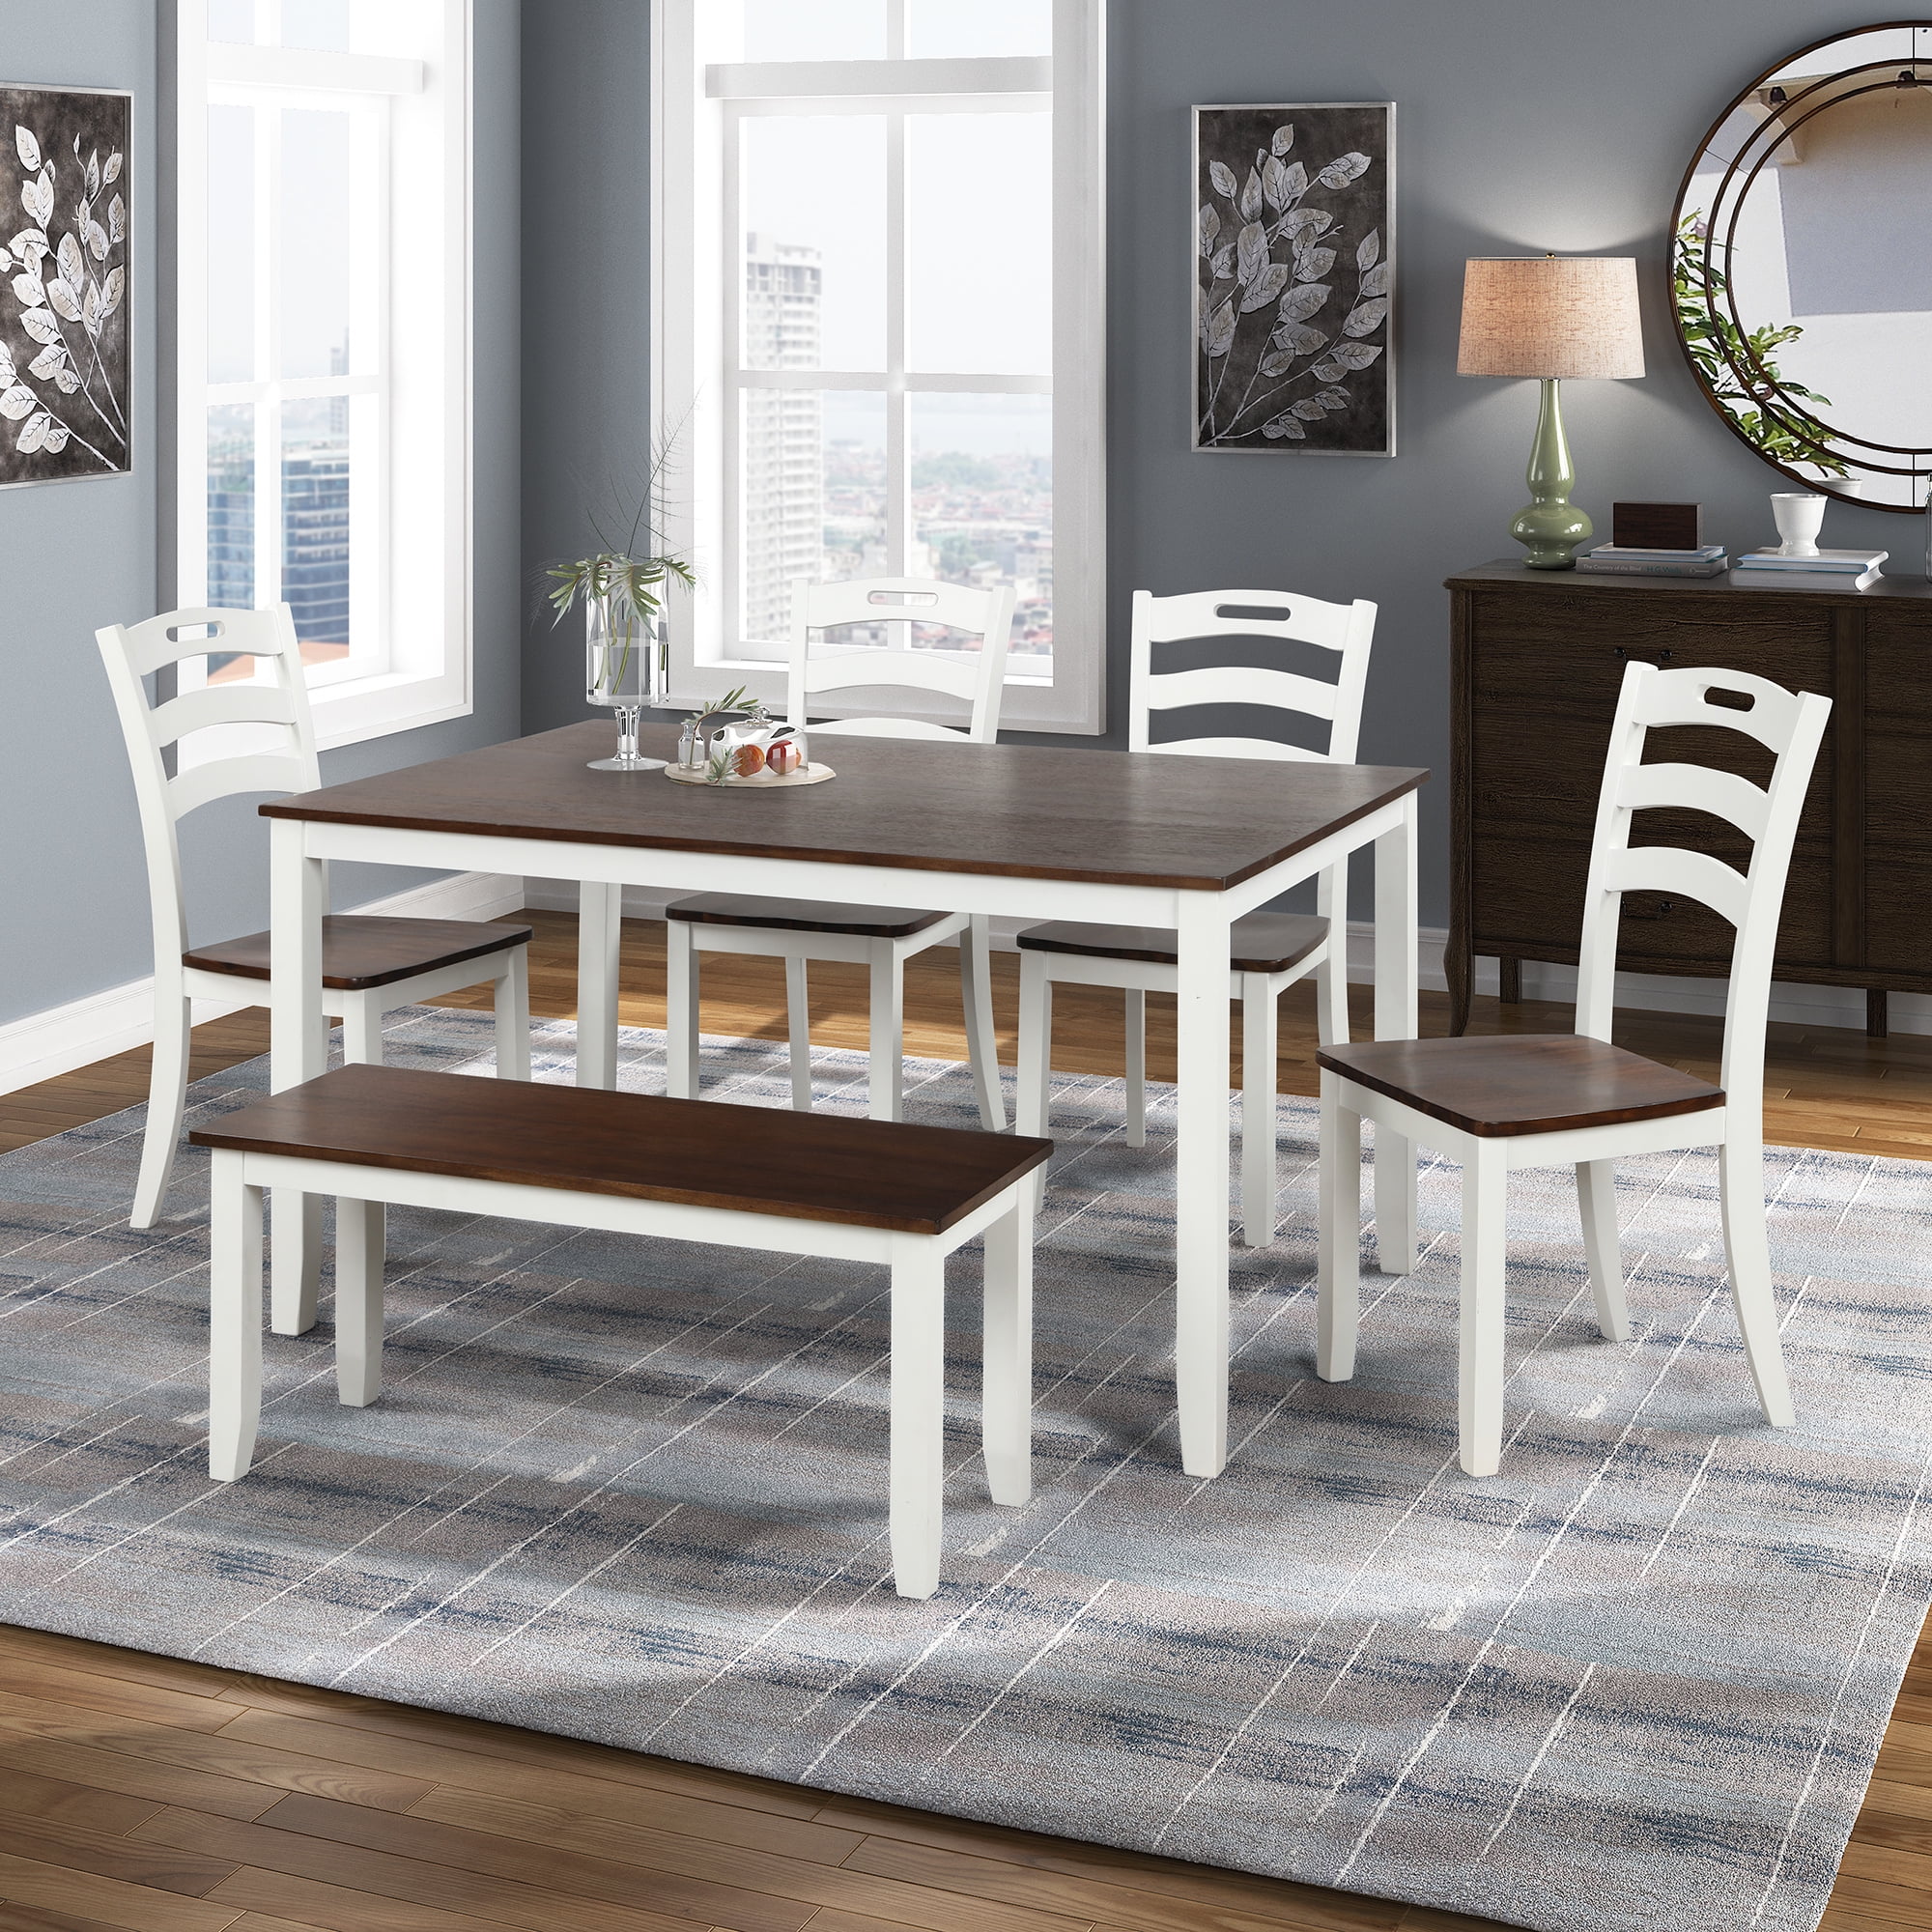 6 Piece Dining Room Table Set Wood, White Rustic Dining Room Table Set